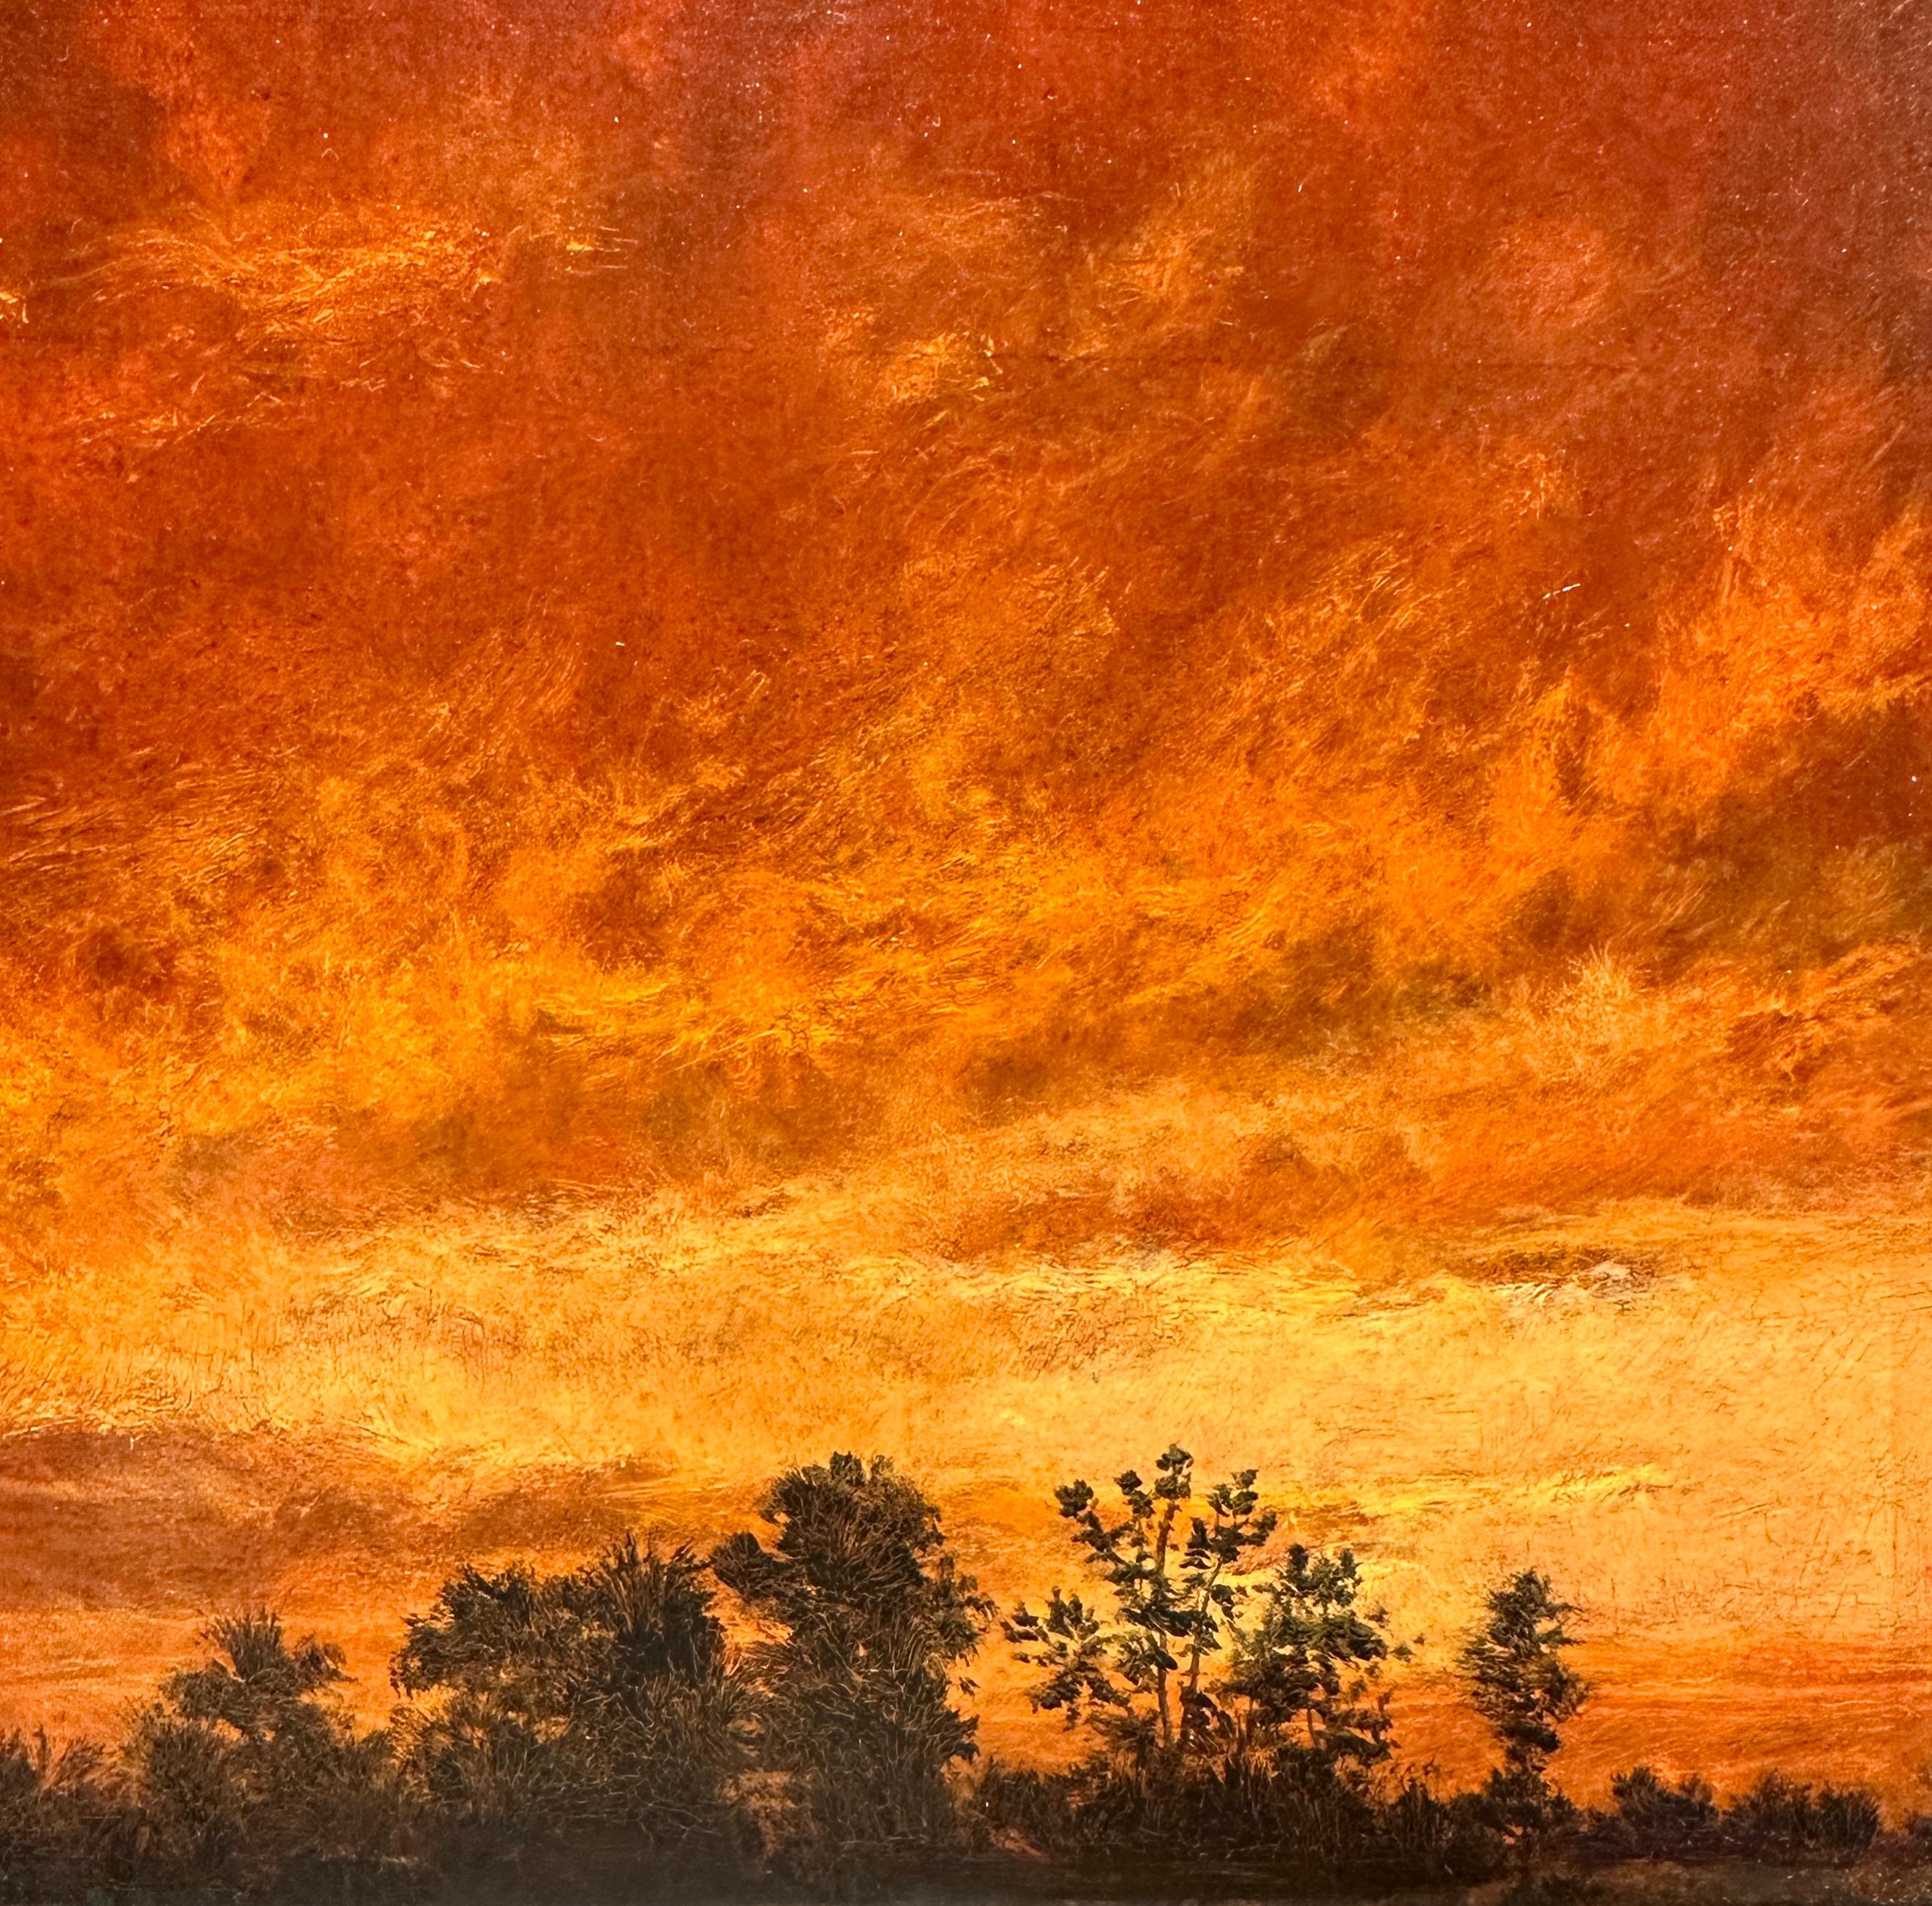 Sunset - Fiery Sky with Silhouetted Trees on the Horizon, Oil on Panel, Framed - Contemporary Painting by Jeff Aeling